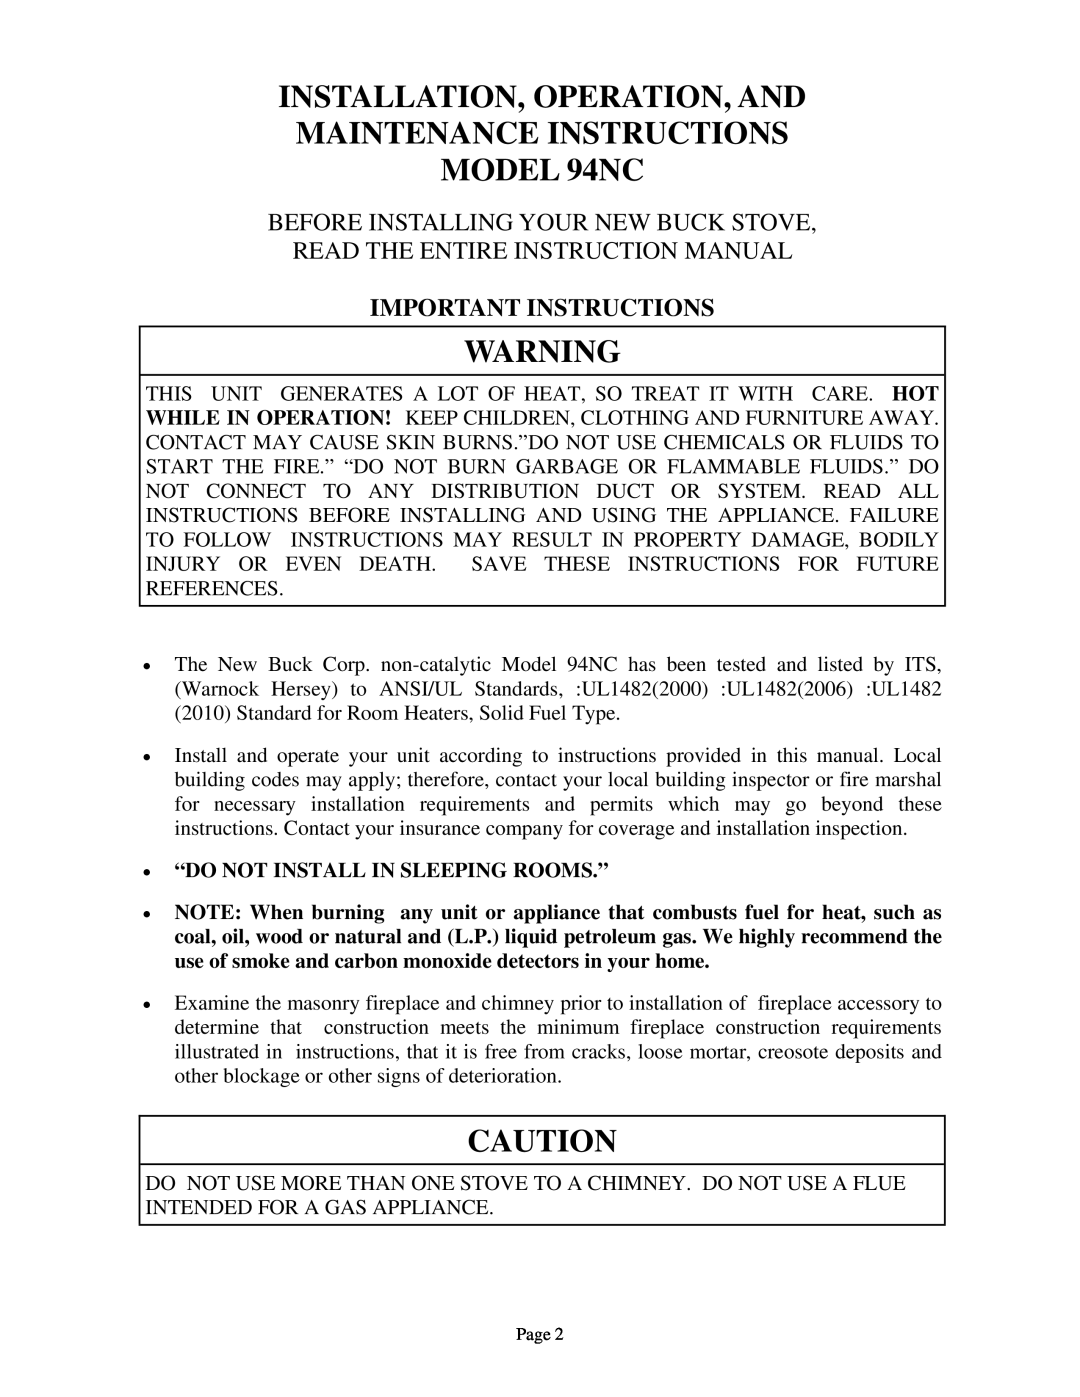 New Buck Corporation Installation, Operation, And, MAINTENANCE INSTRUCTIONS MODEL 94NC, Important Instructions 